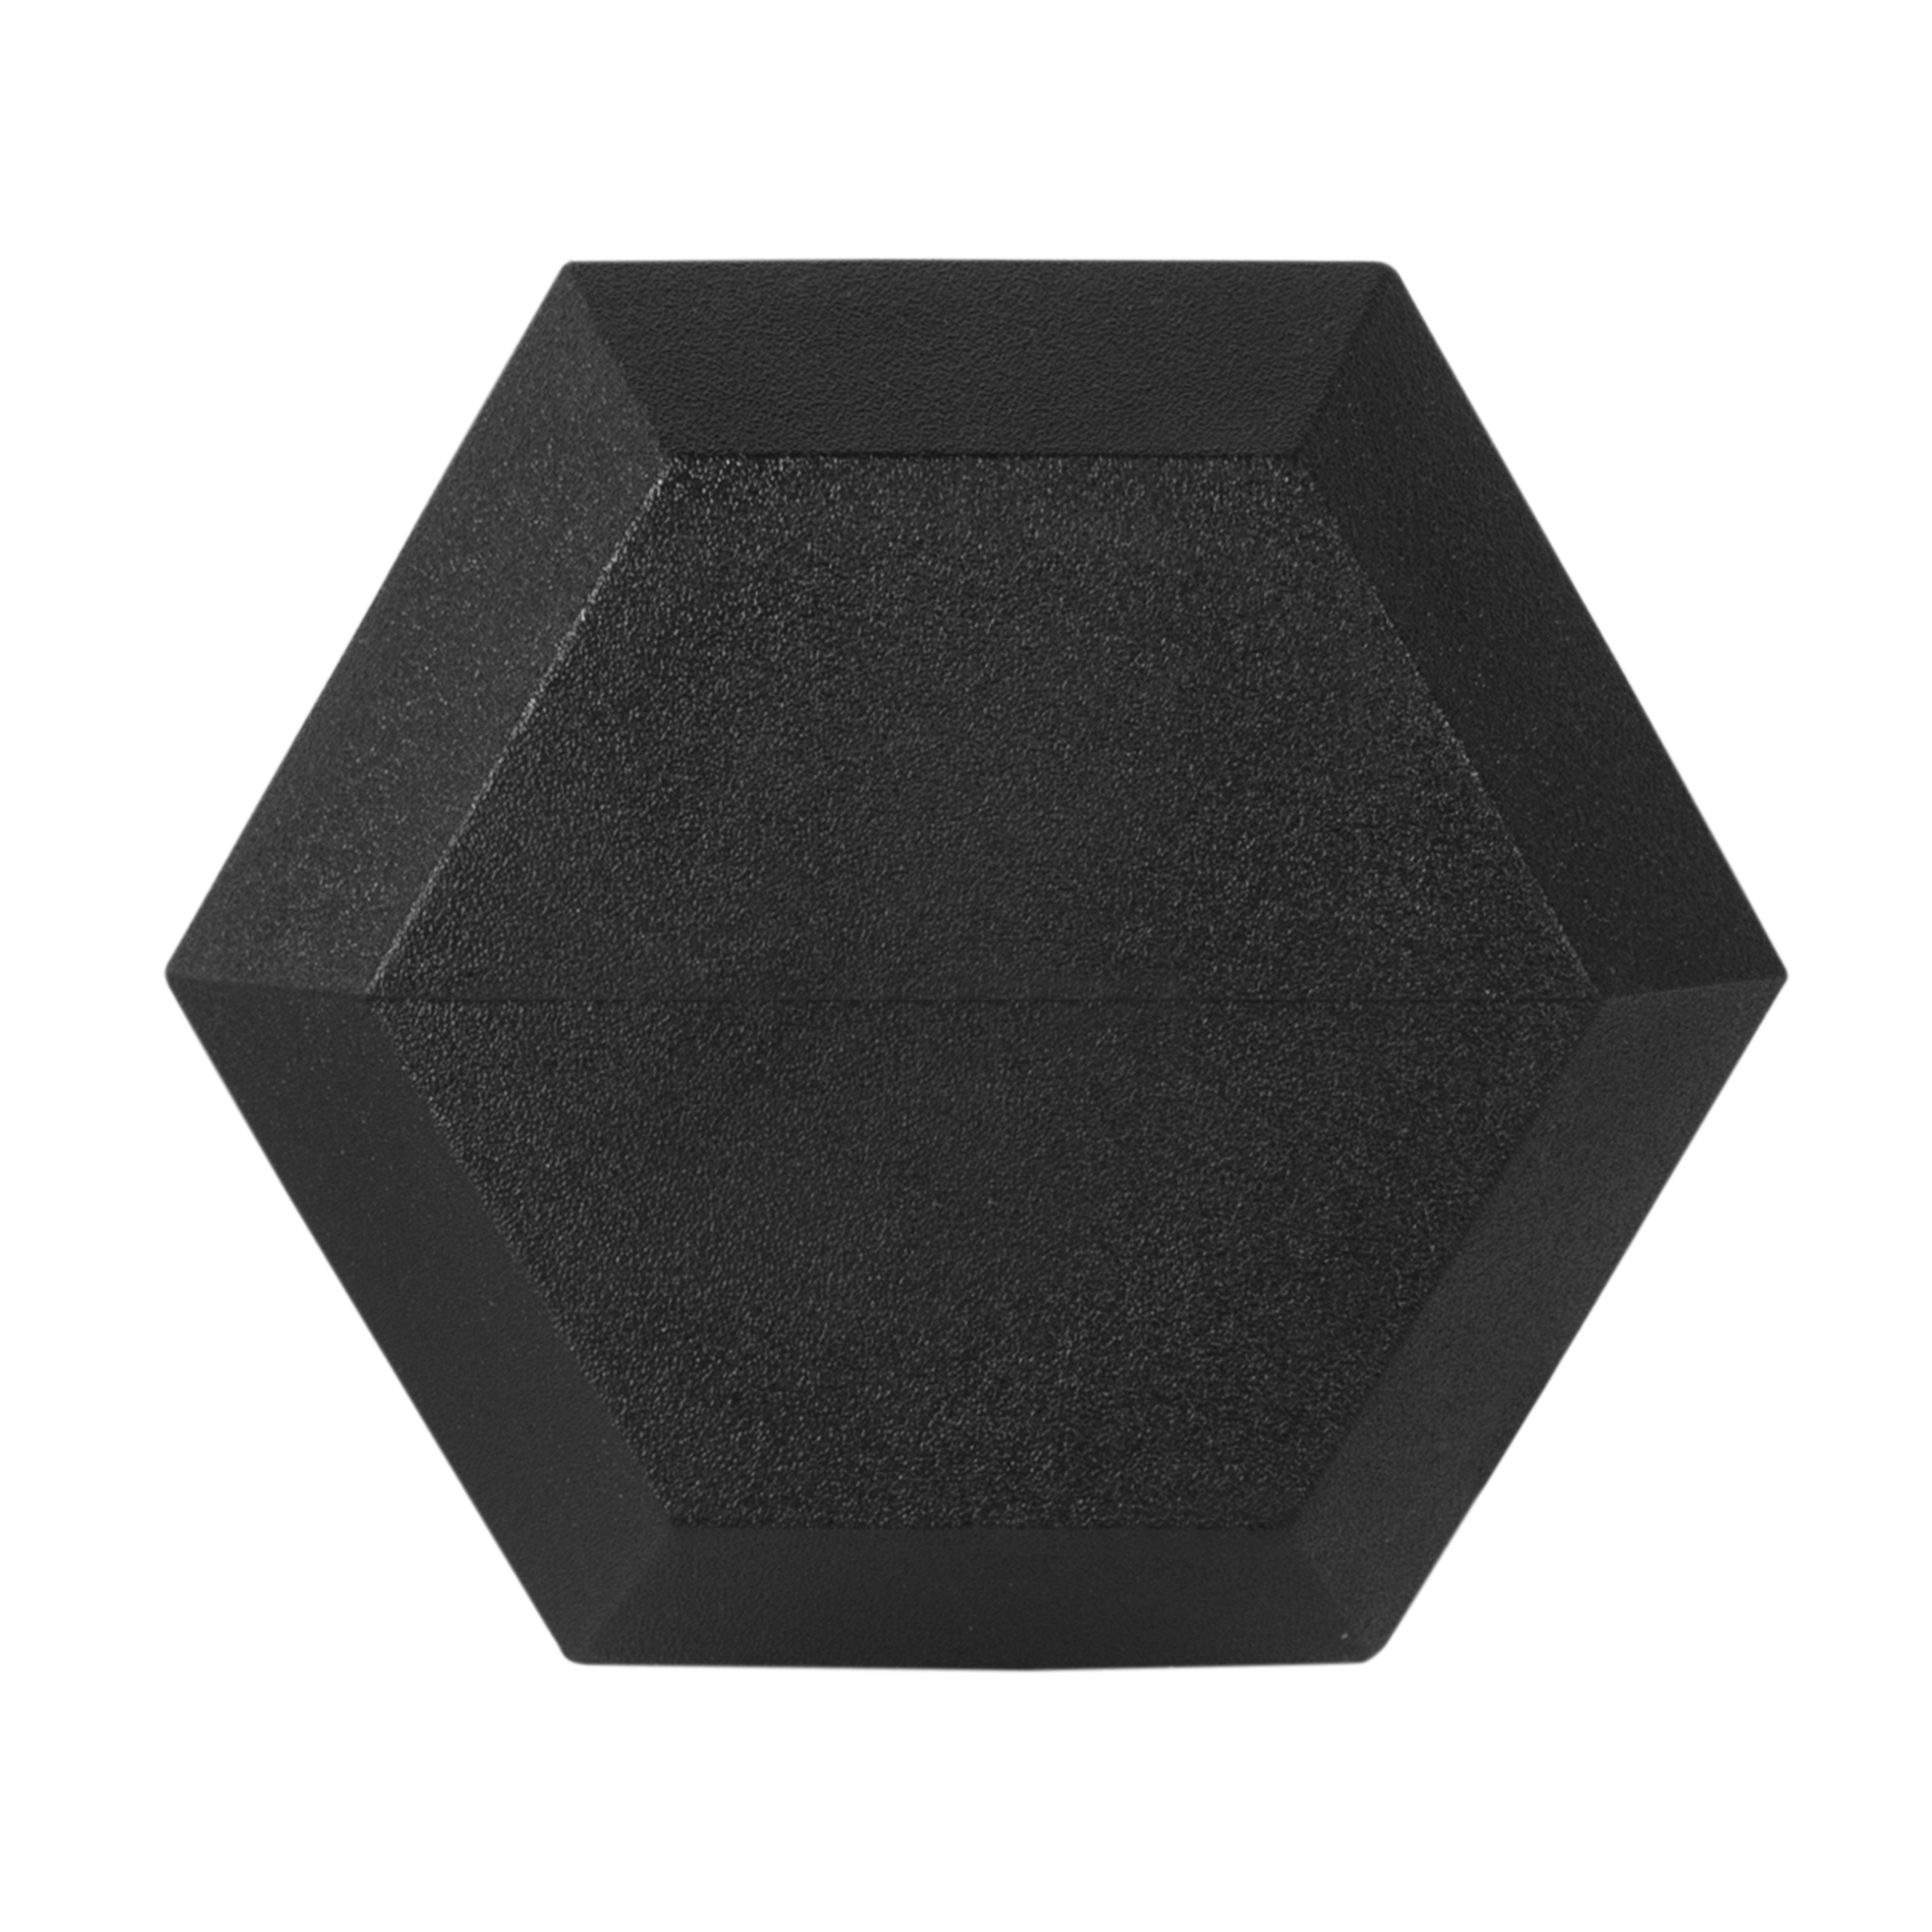 CAP Barbell, 65lb Coated Hex Dumbbell, Single - image 3 of 7